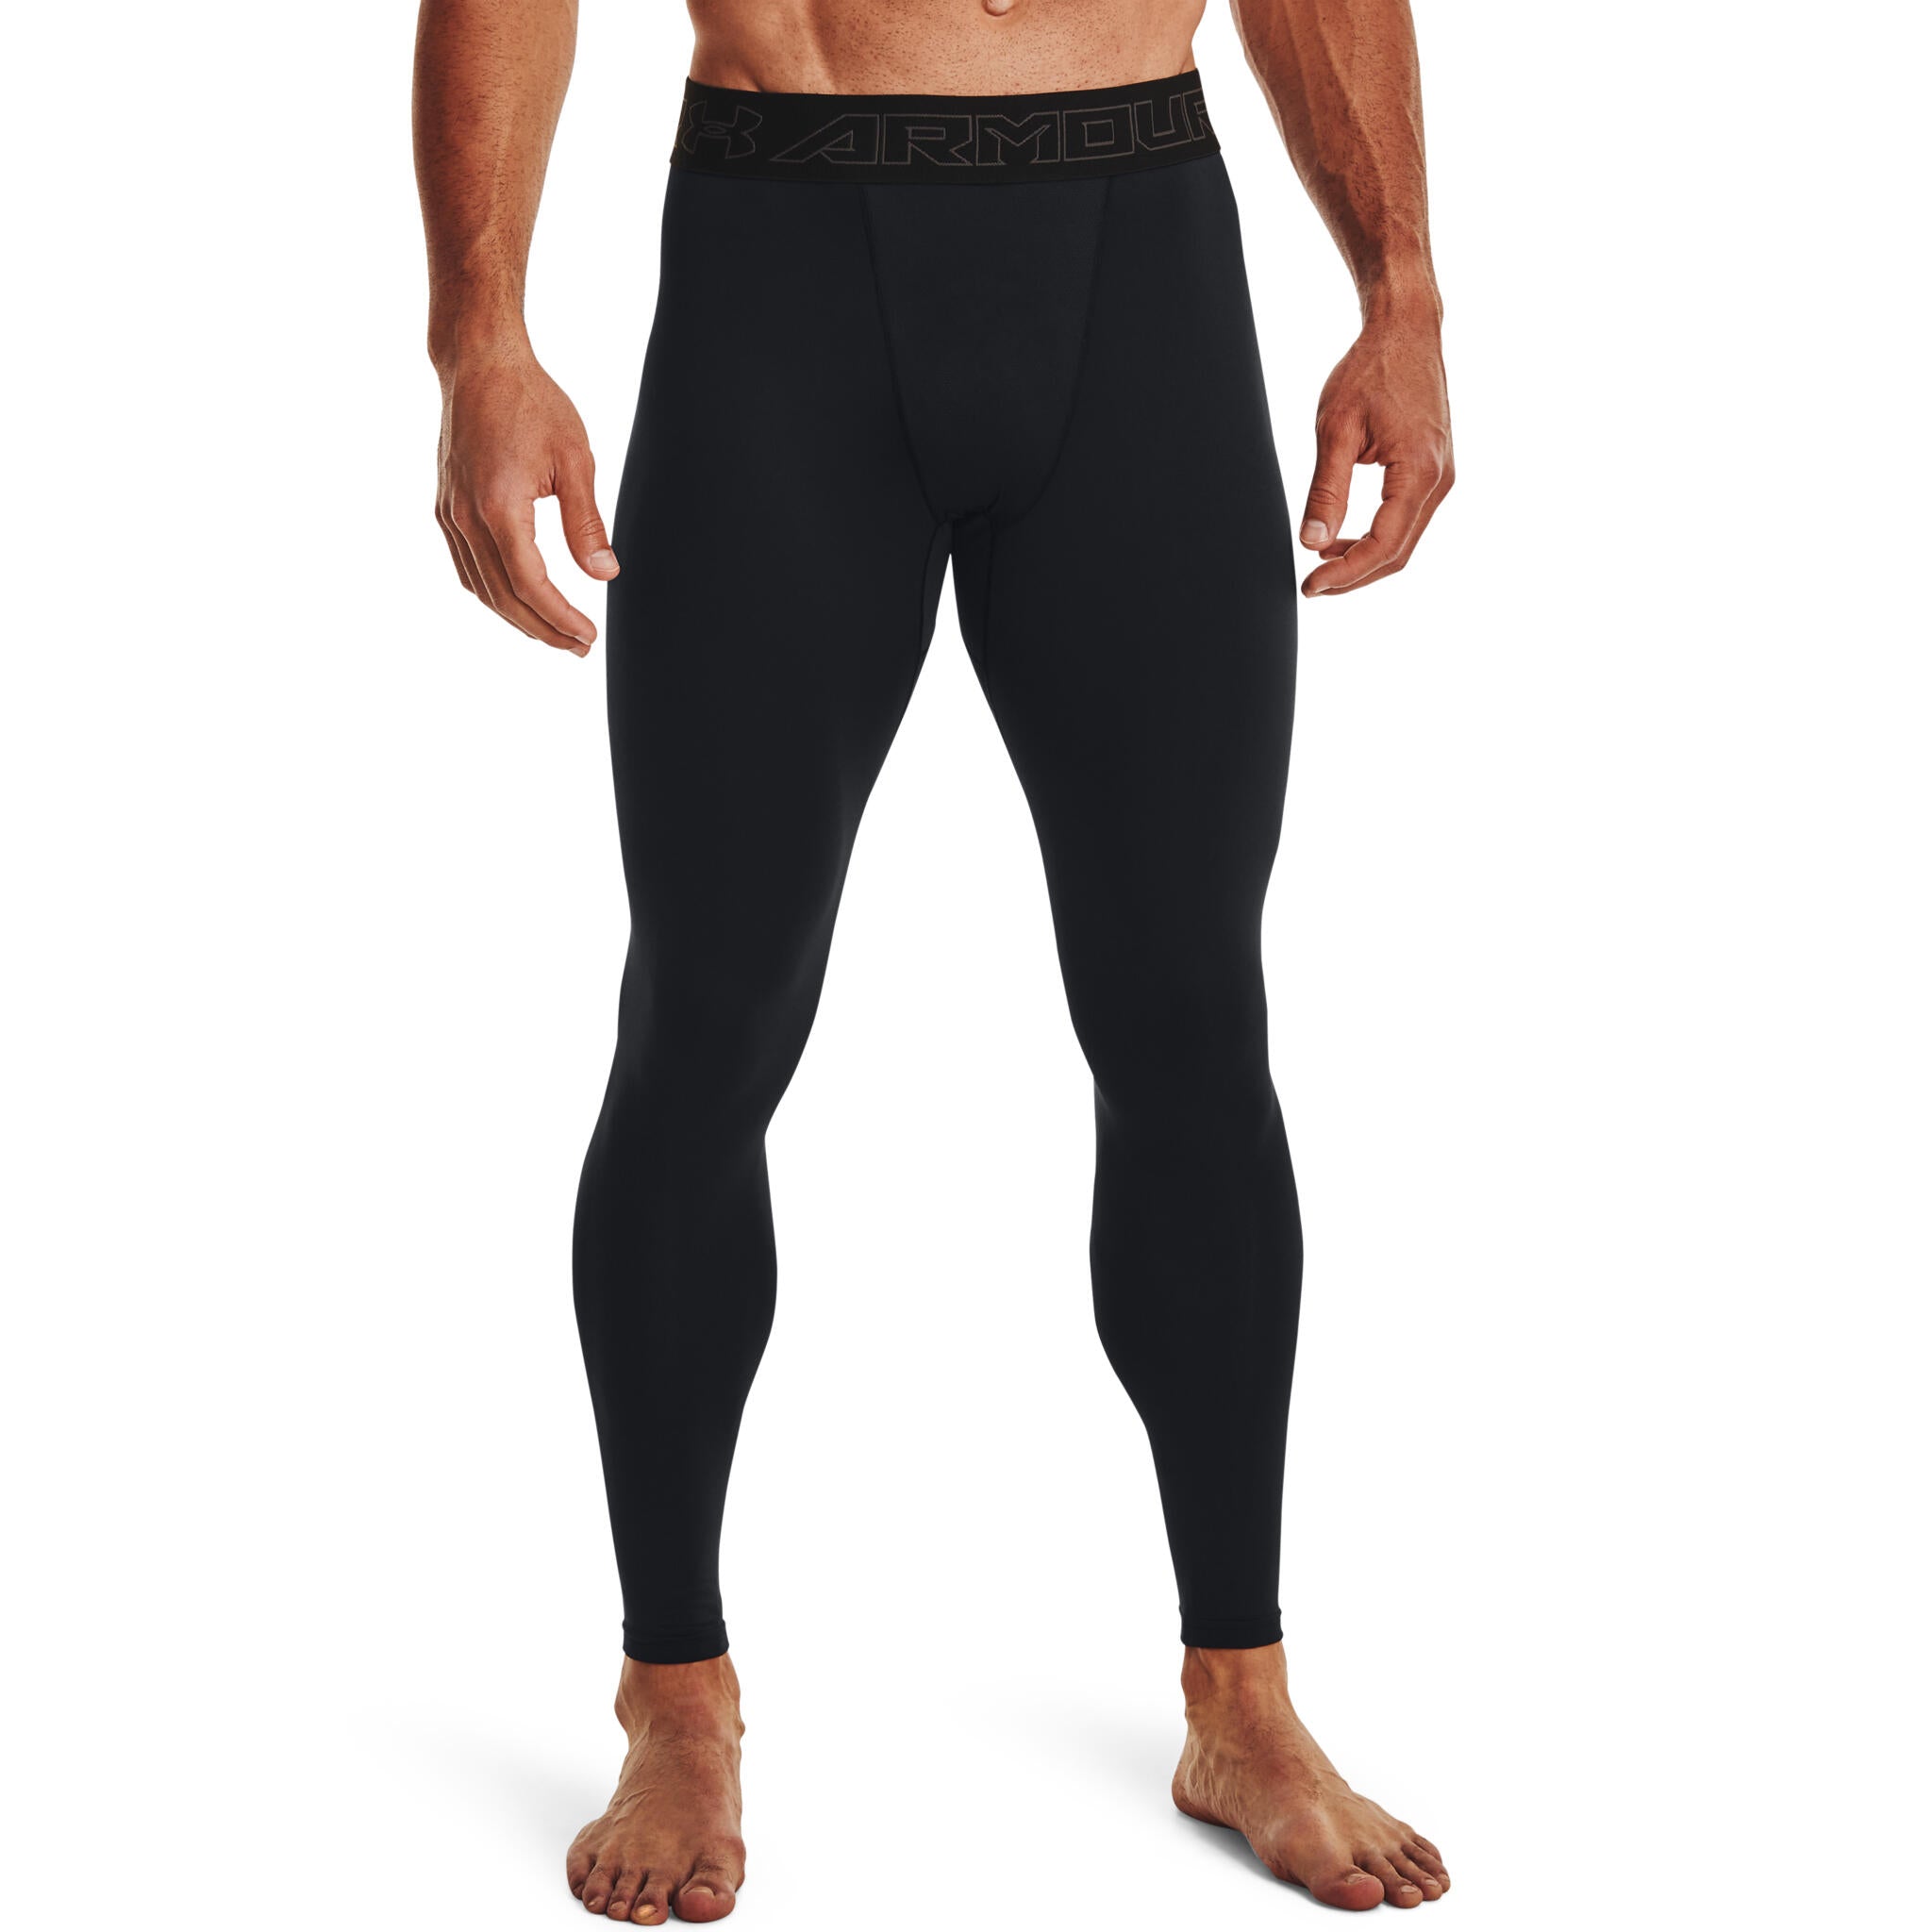 Shop Under Armor Legings For Men with great discounts and prices